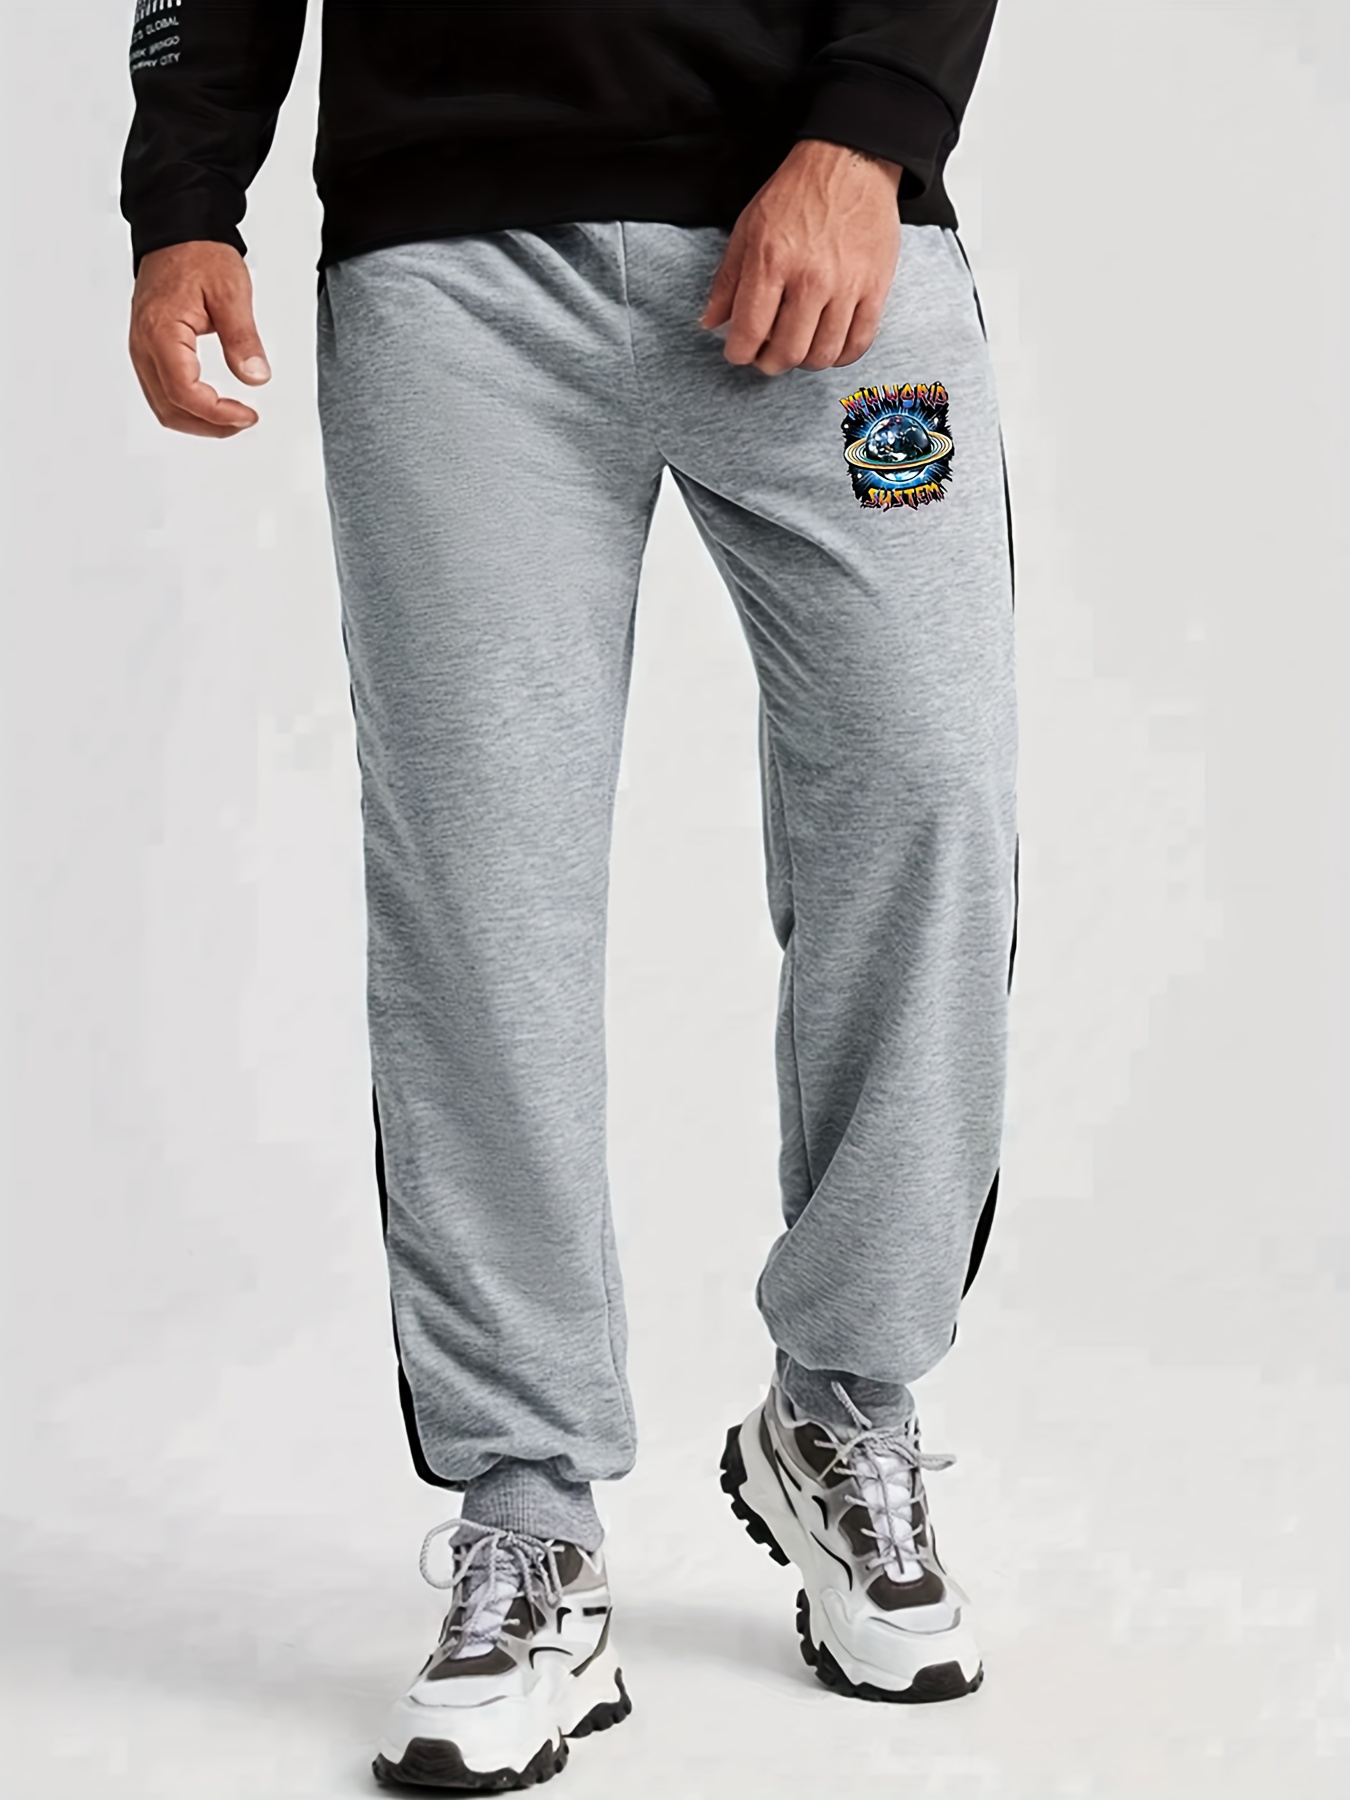 Saturn Baggy - Baggy Joggers for Men